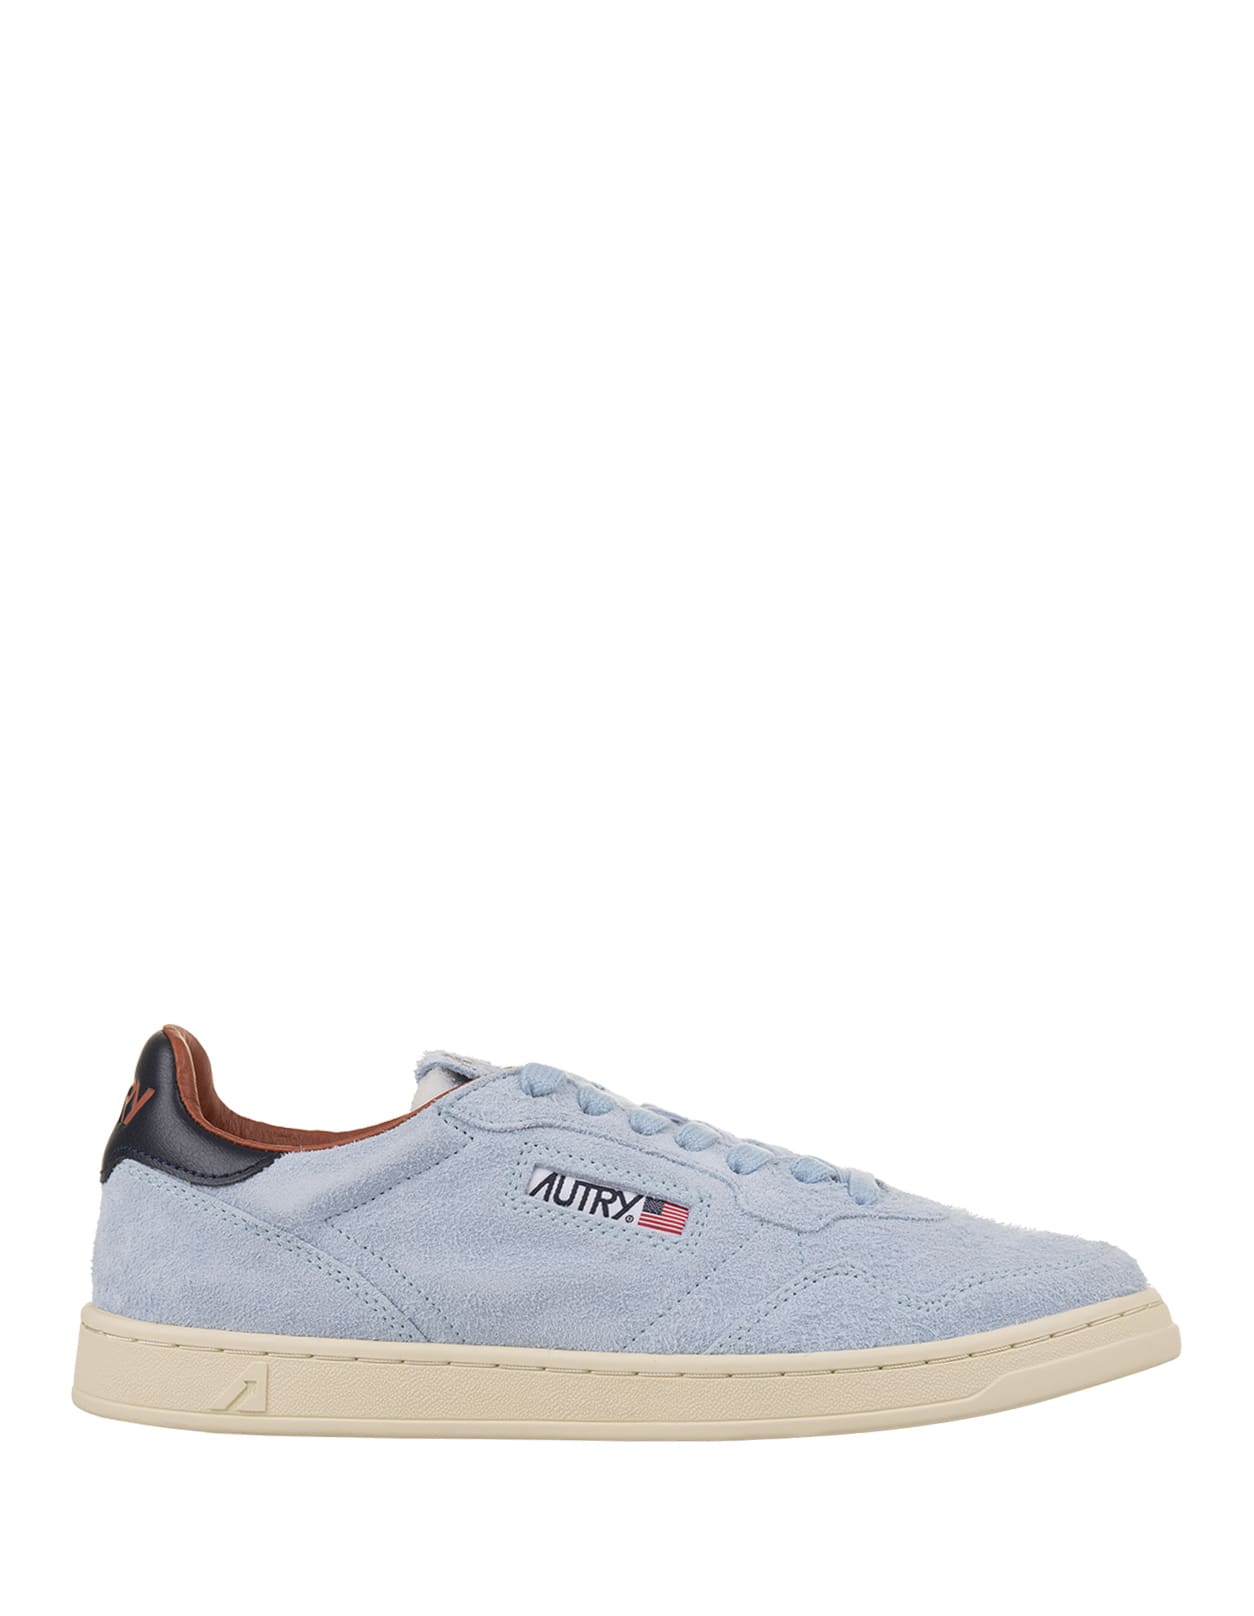 Autry Medalist Flat Sneakers In Light Blue And Dark Blue Suede